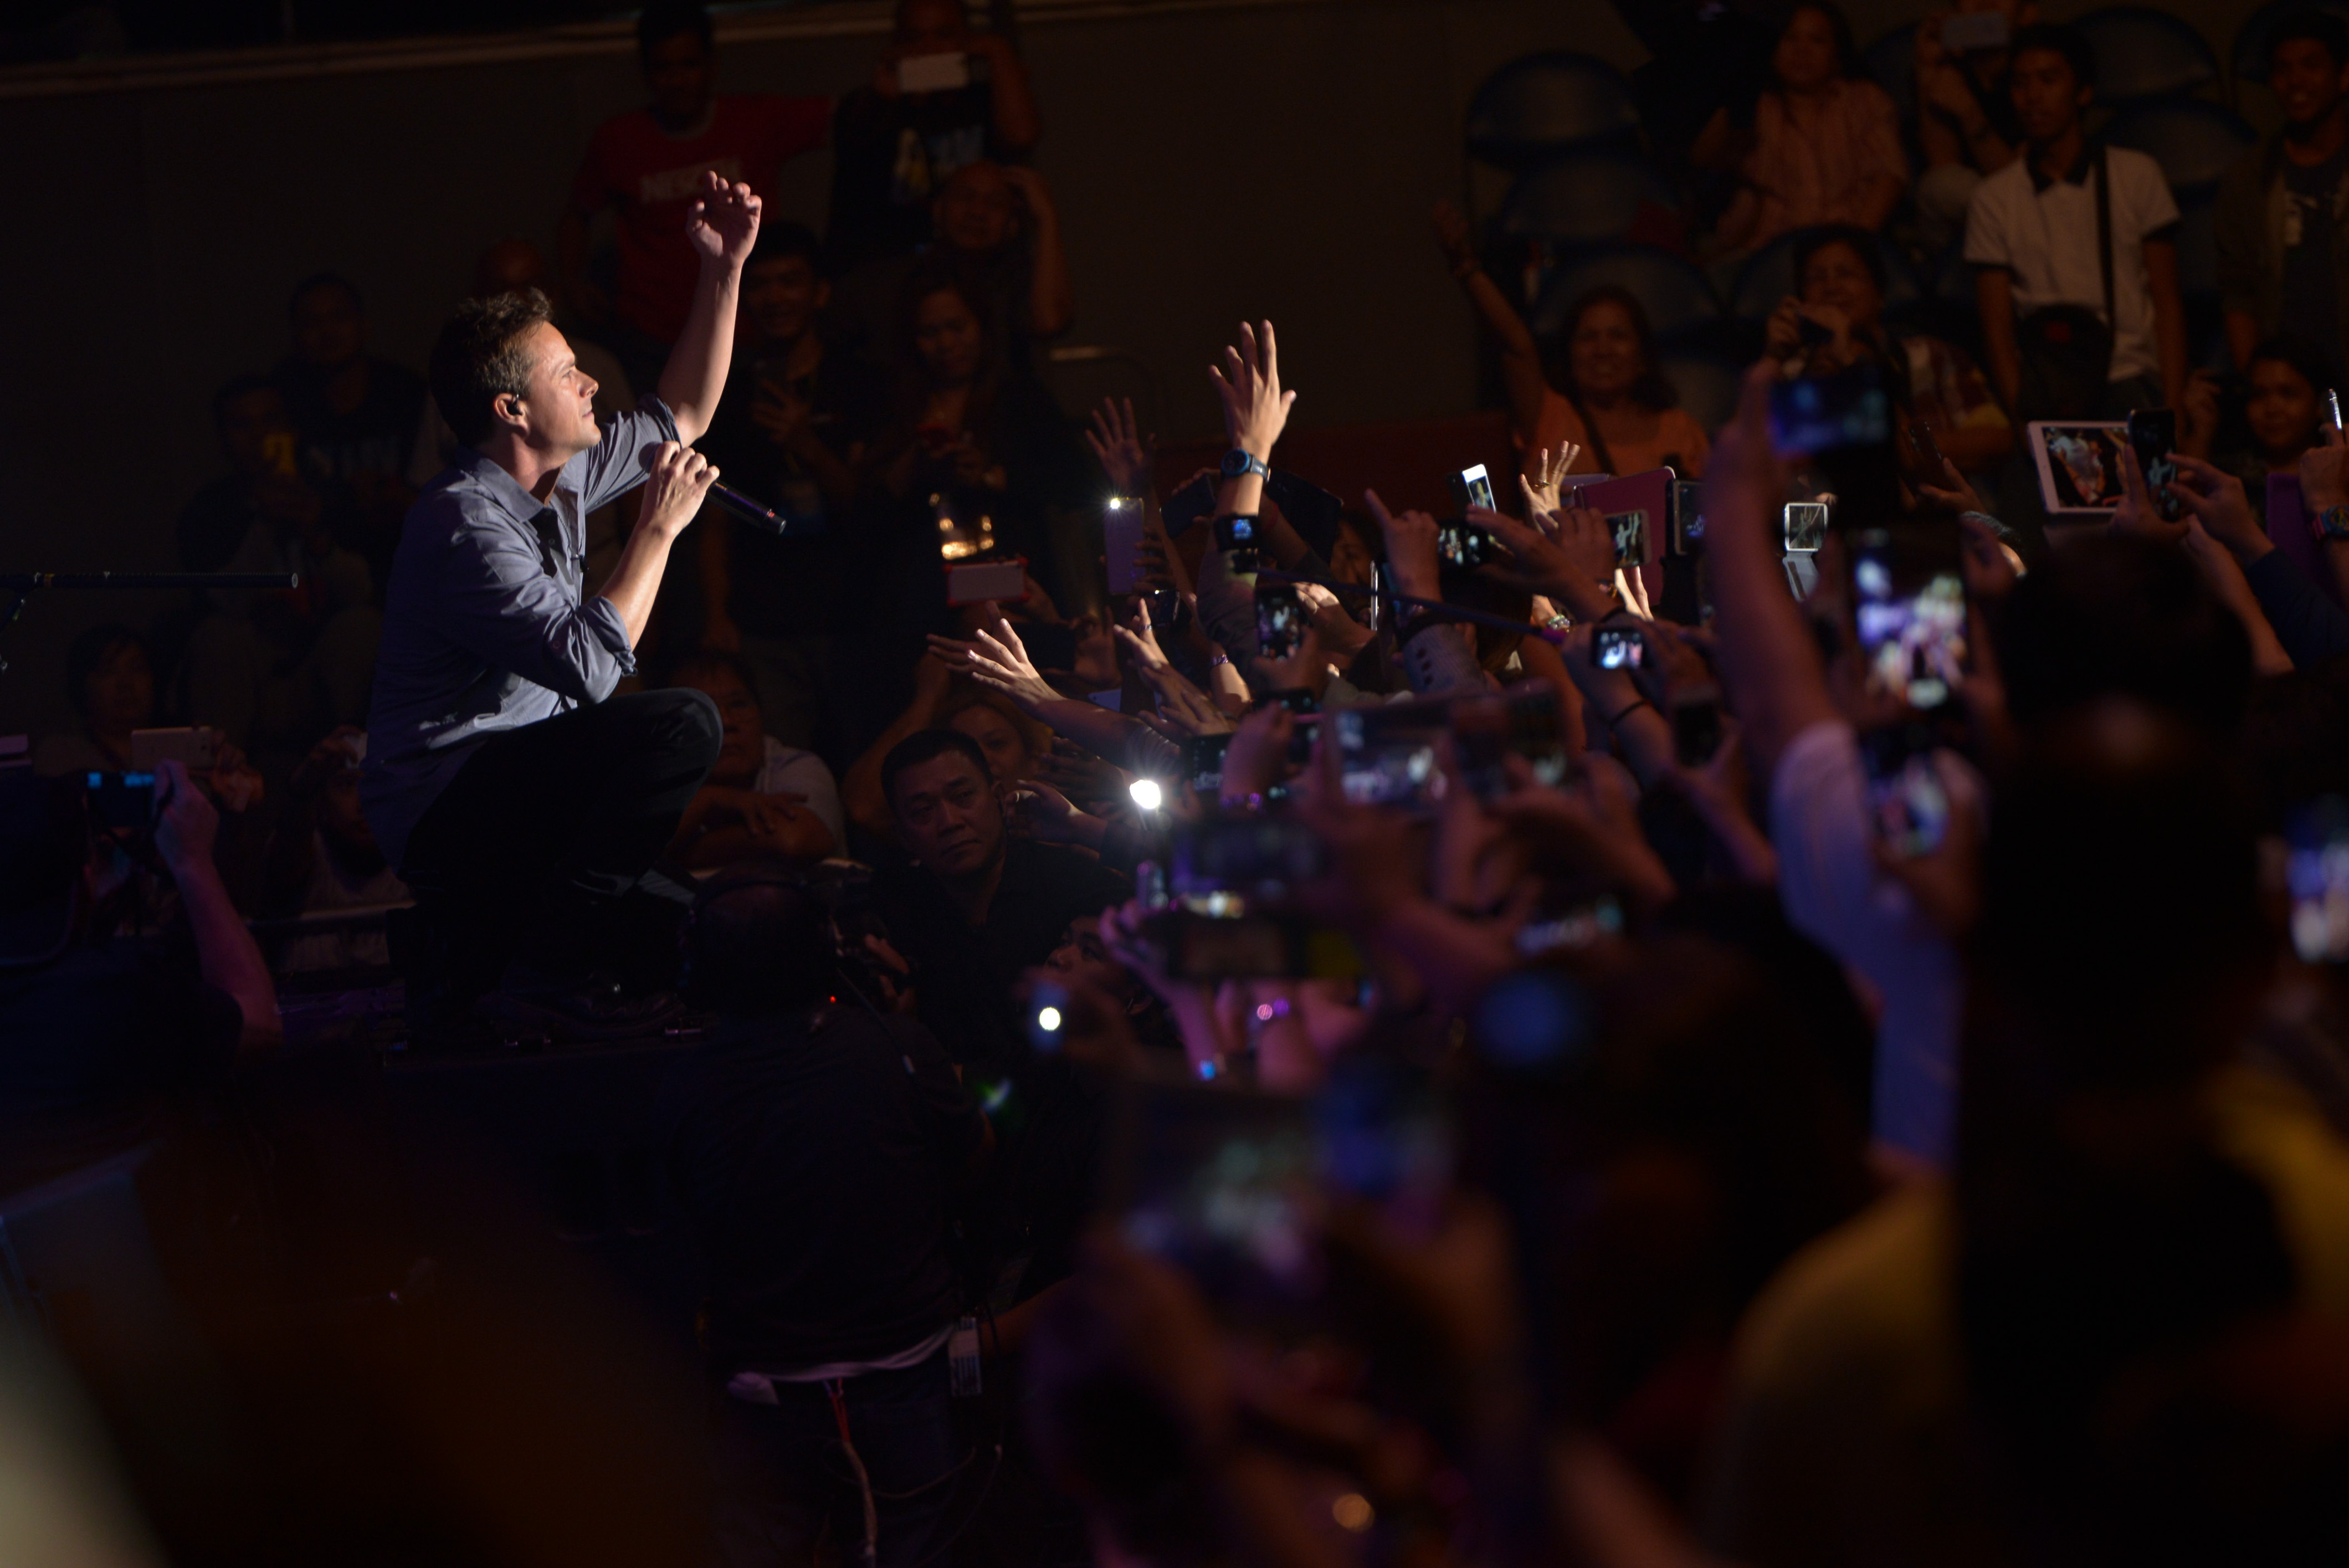 Bryan White Returns to Manila for an ‘Up Close and Personal’ Show